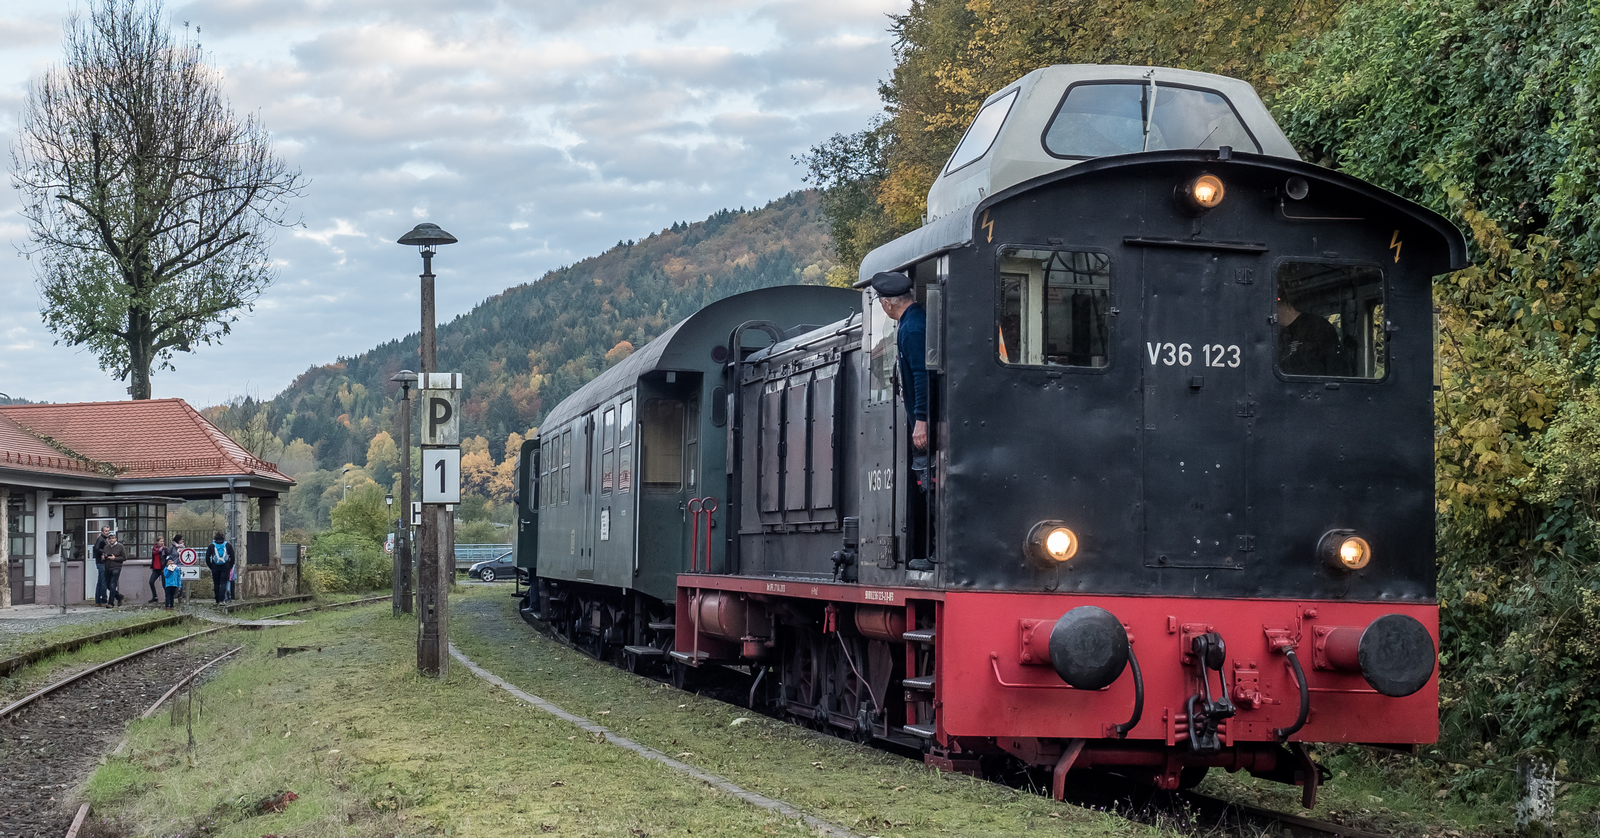 V 36 123 of the Franconian Switzerland steam railway with a tower cab in October 2016 in Muggendorf